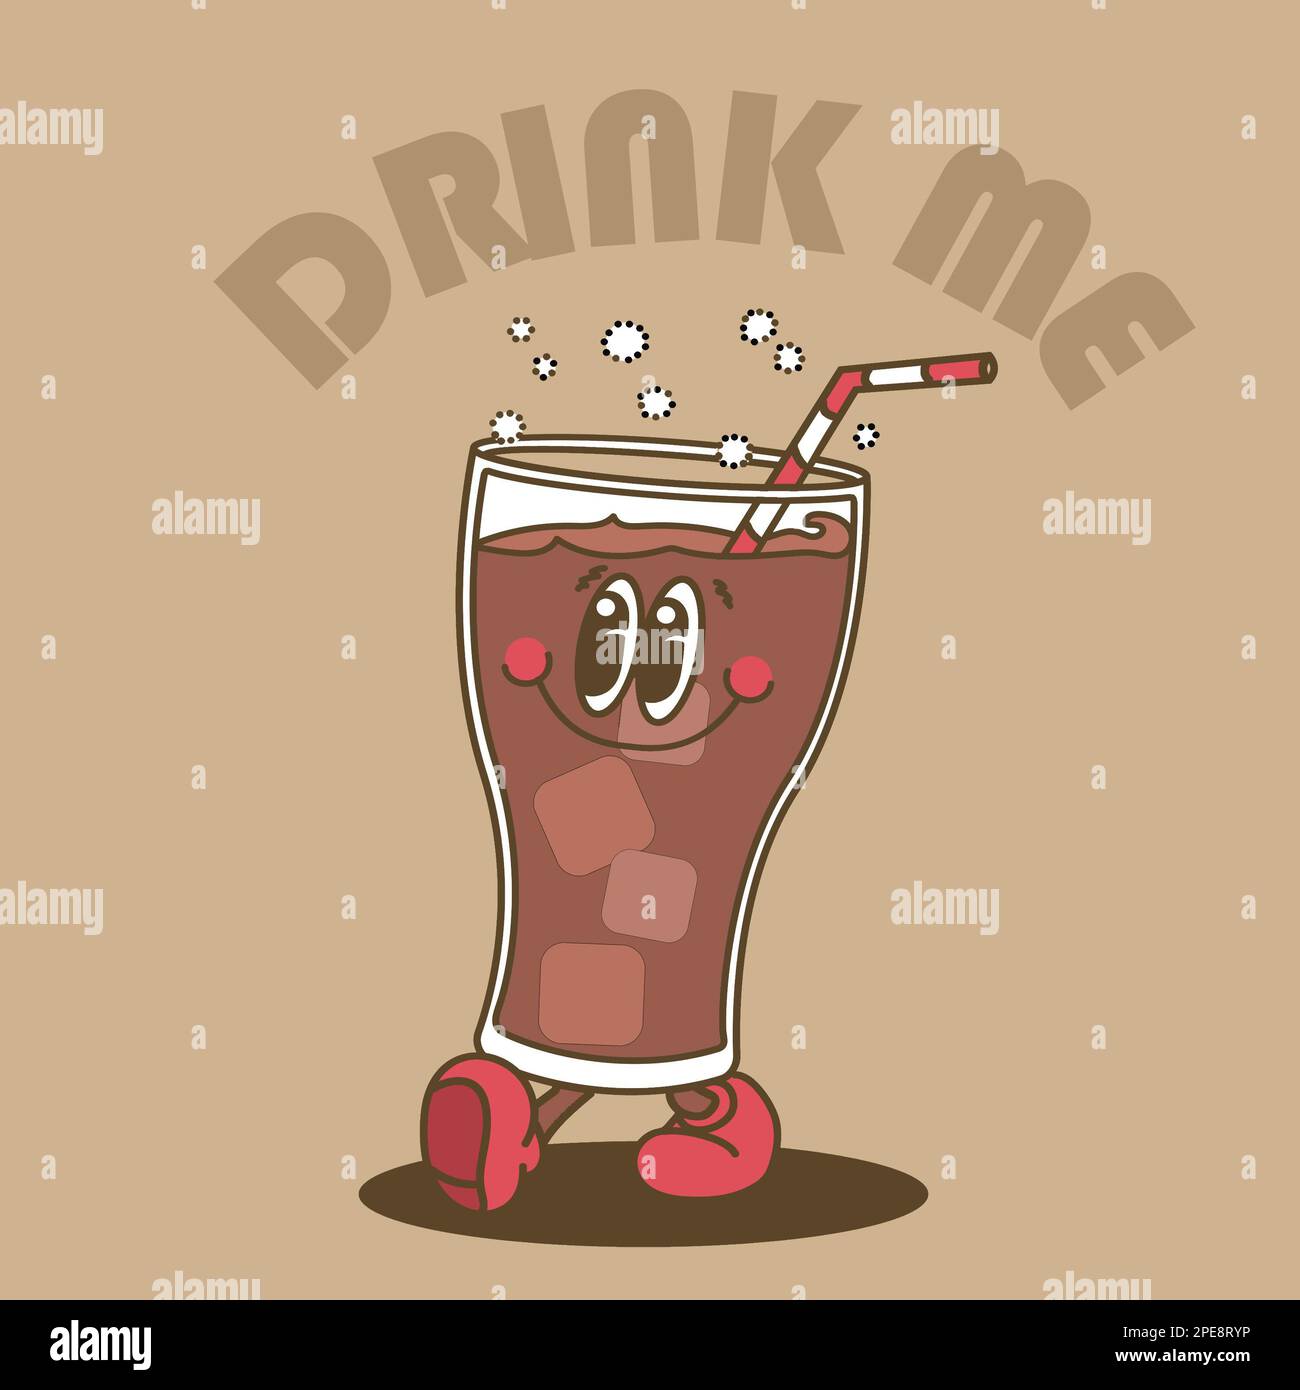 Illustration of happy, smiling soft drink. Fast food. Fizzy cola or root beer. Walking. Text saying 'Drink me'. Stock Photo